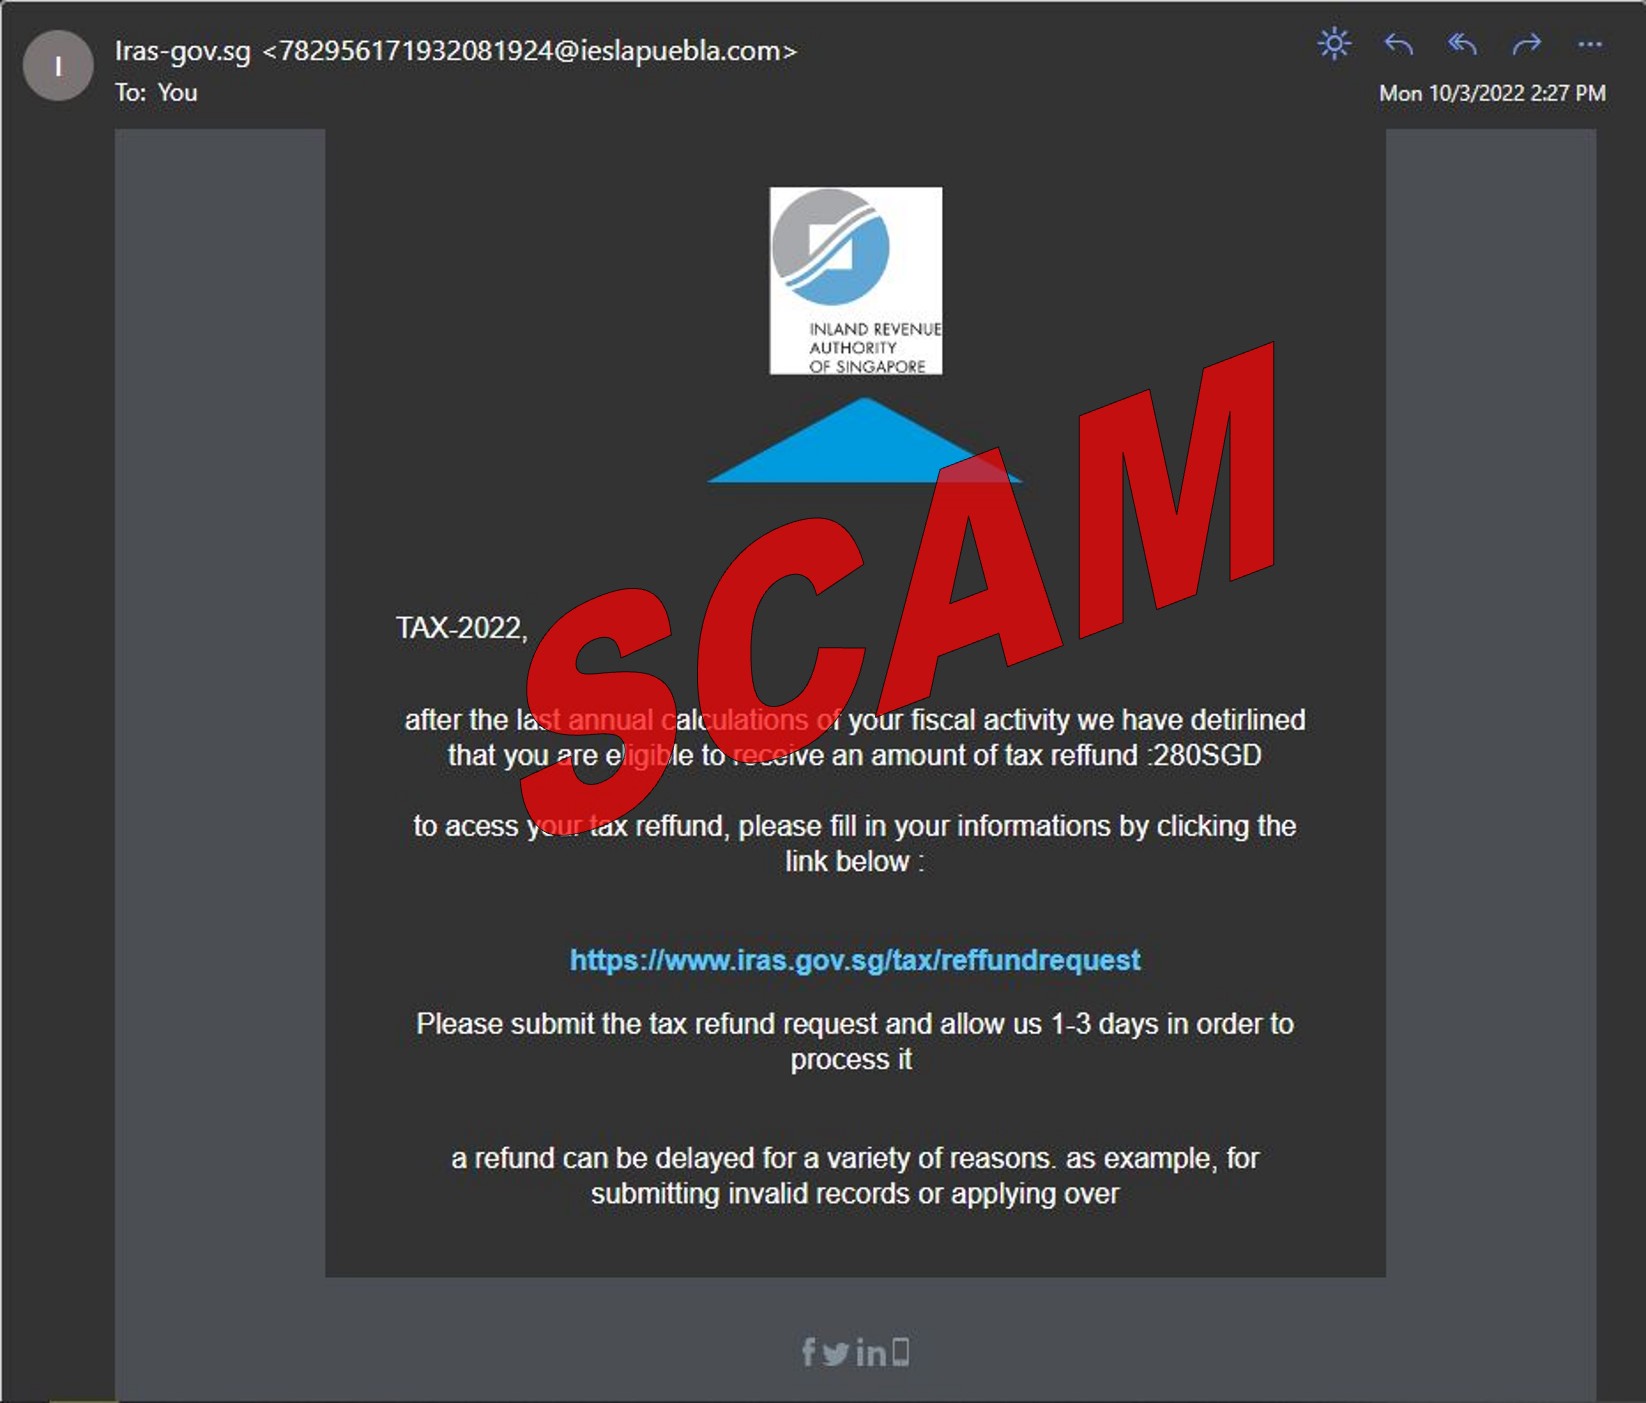 Scam email - 3 Oct 2022